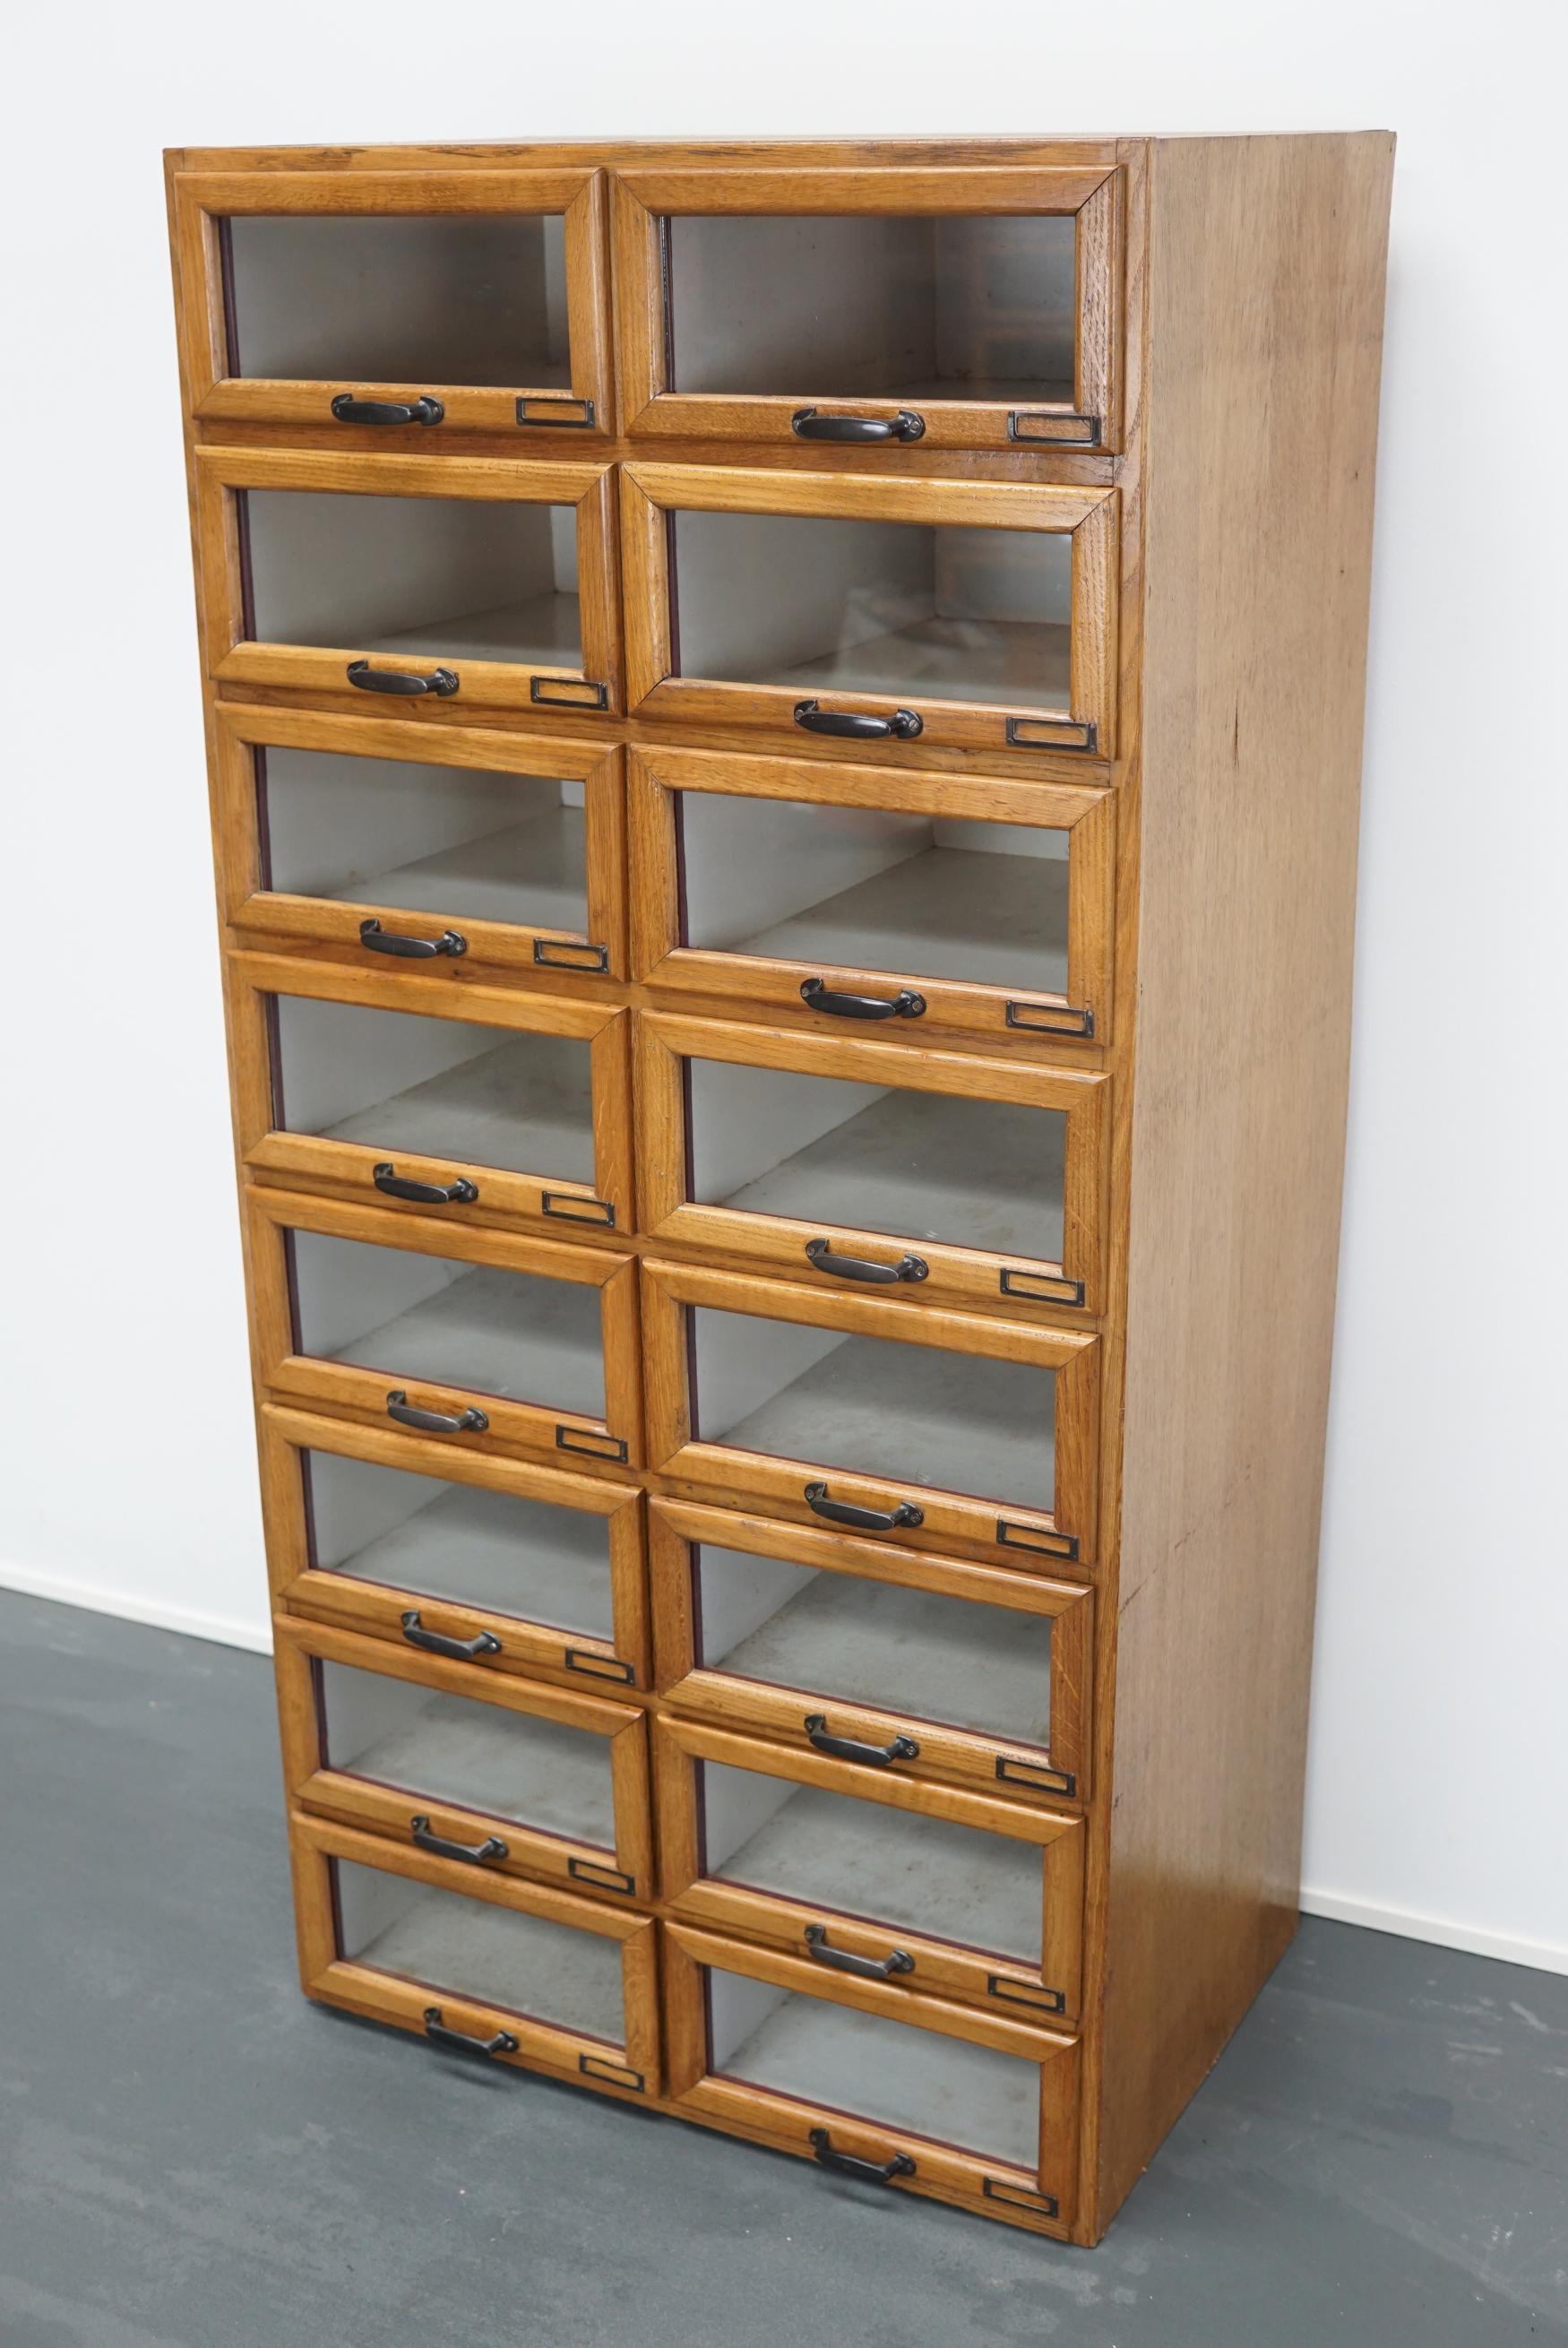 This vintage haberdashery shop cabinet originates from the Netherlands. The piece is made from oak and features 16 drawers which measure 42 x 30 x 14 cm on the inside.